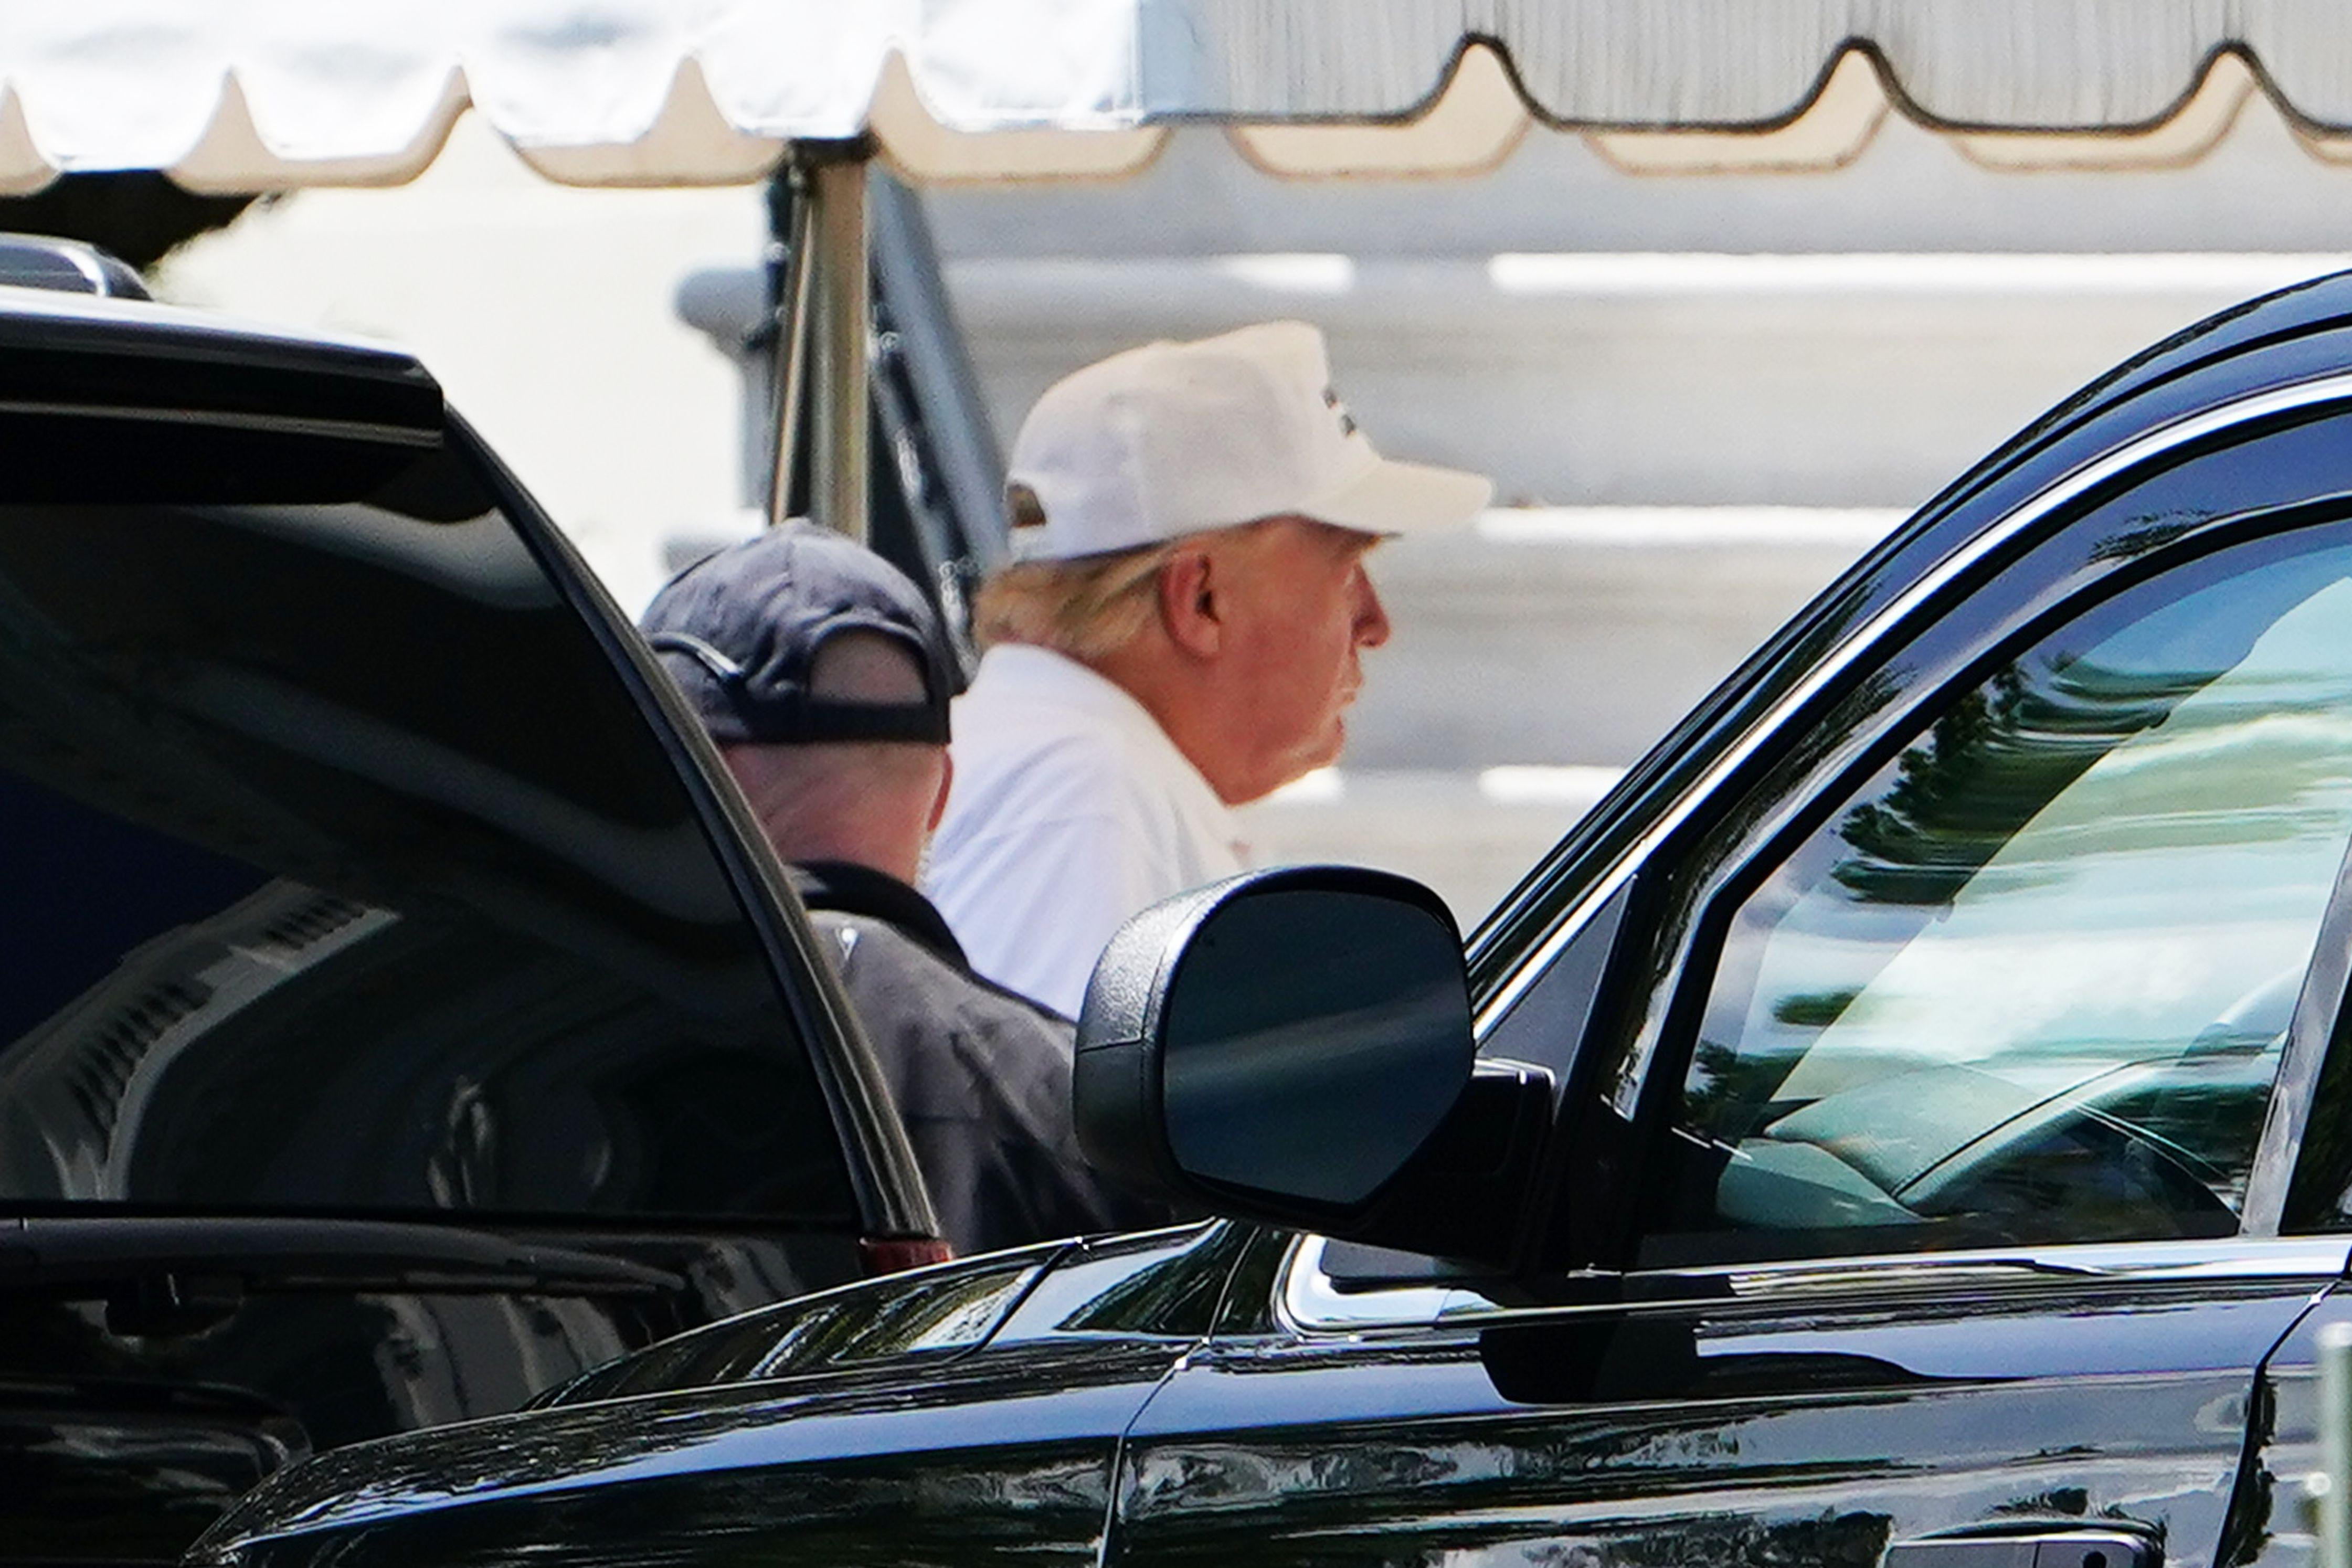 President Donald Trump walks from a SUV upon return to the White House in Washington, D.C. on May 23, 2020.